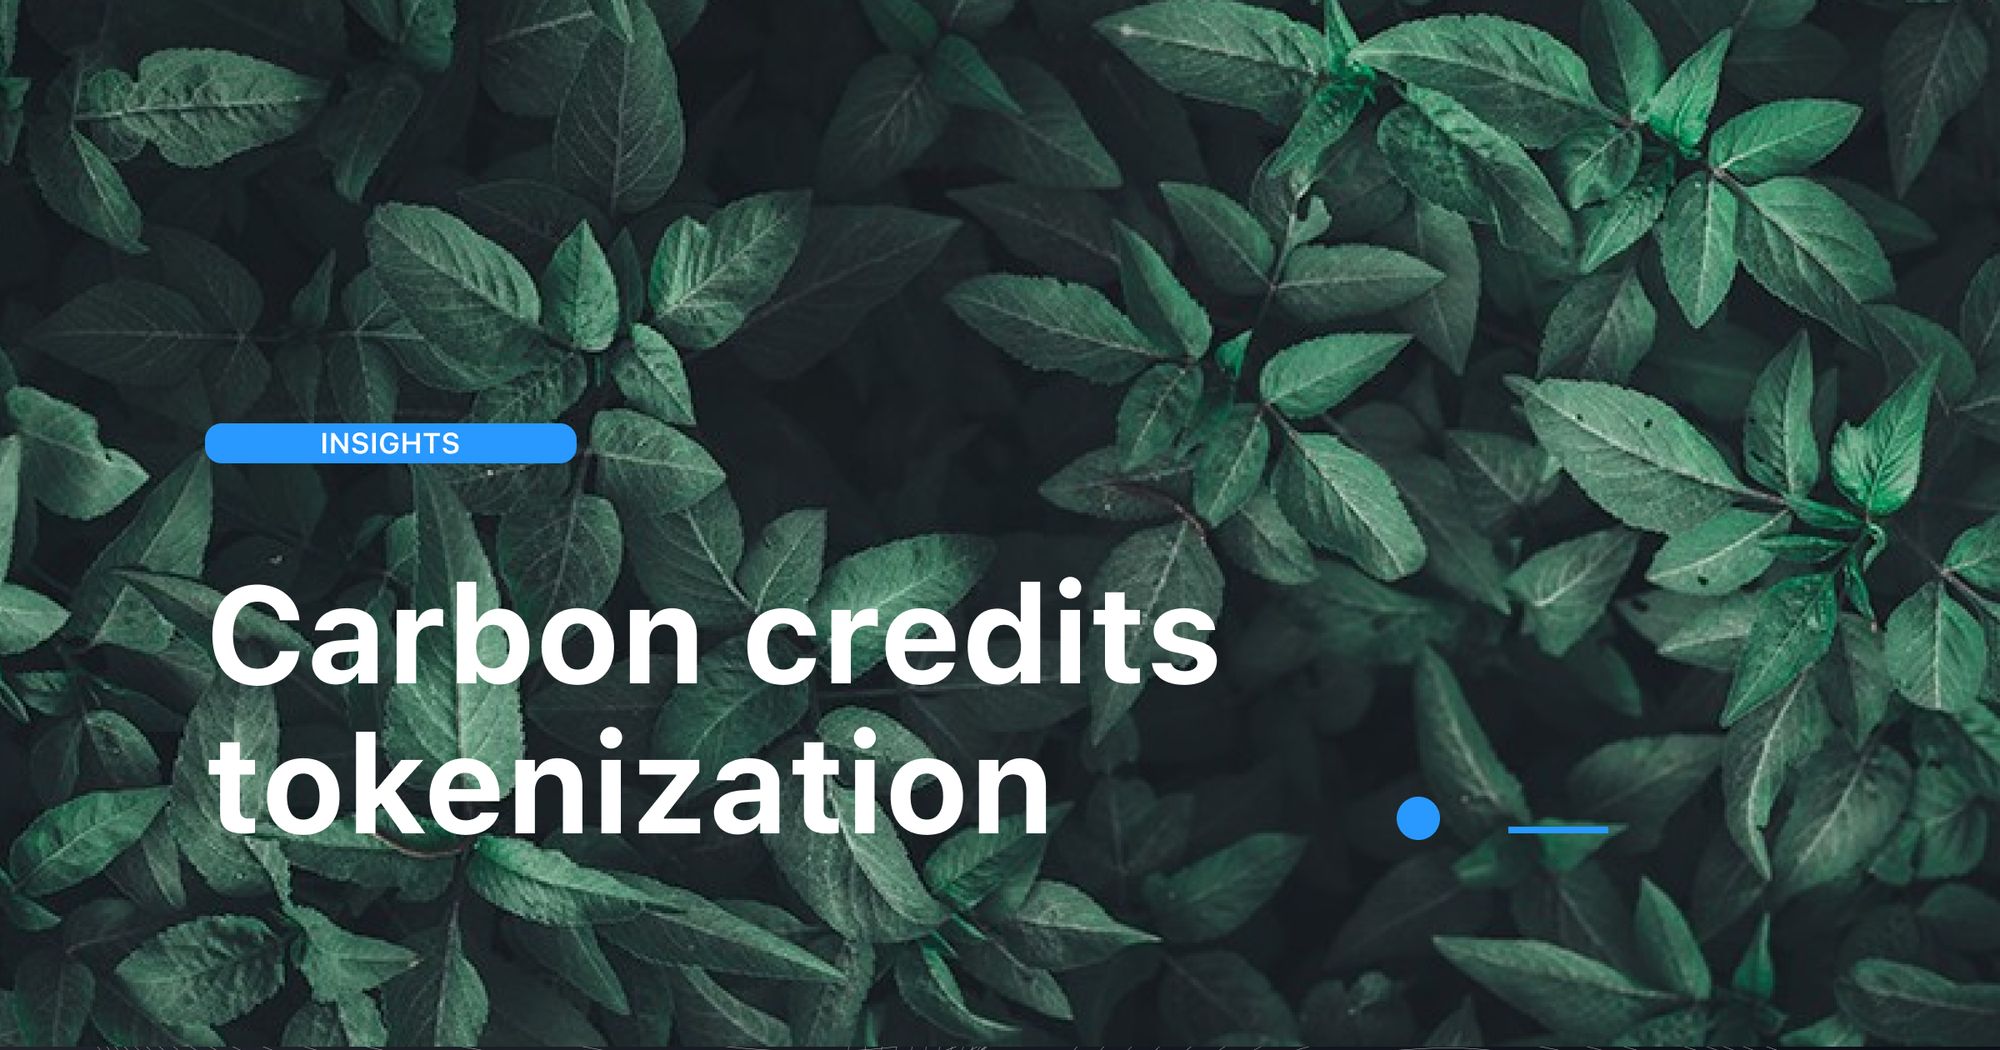 What are carbon credits and how to tokenize them?